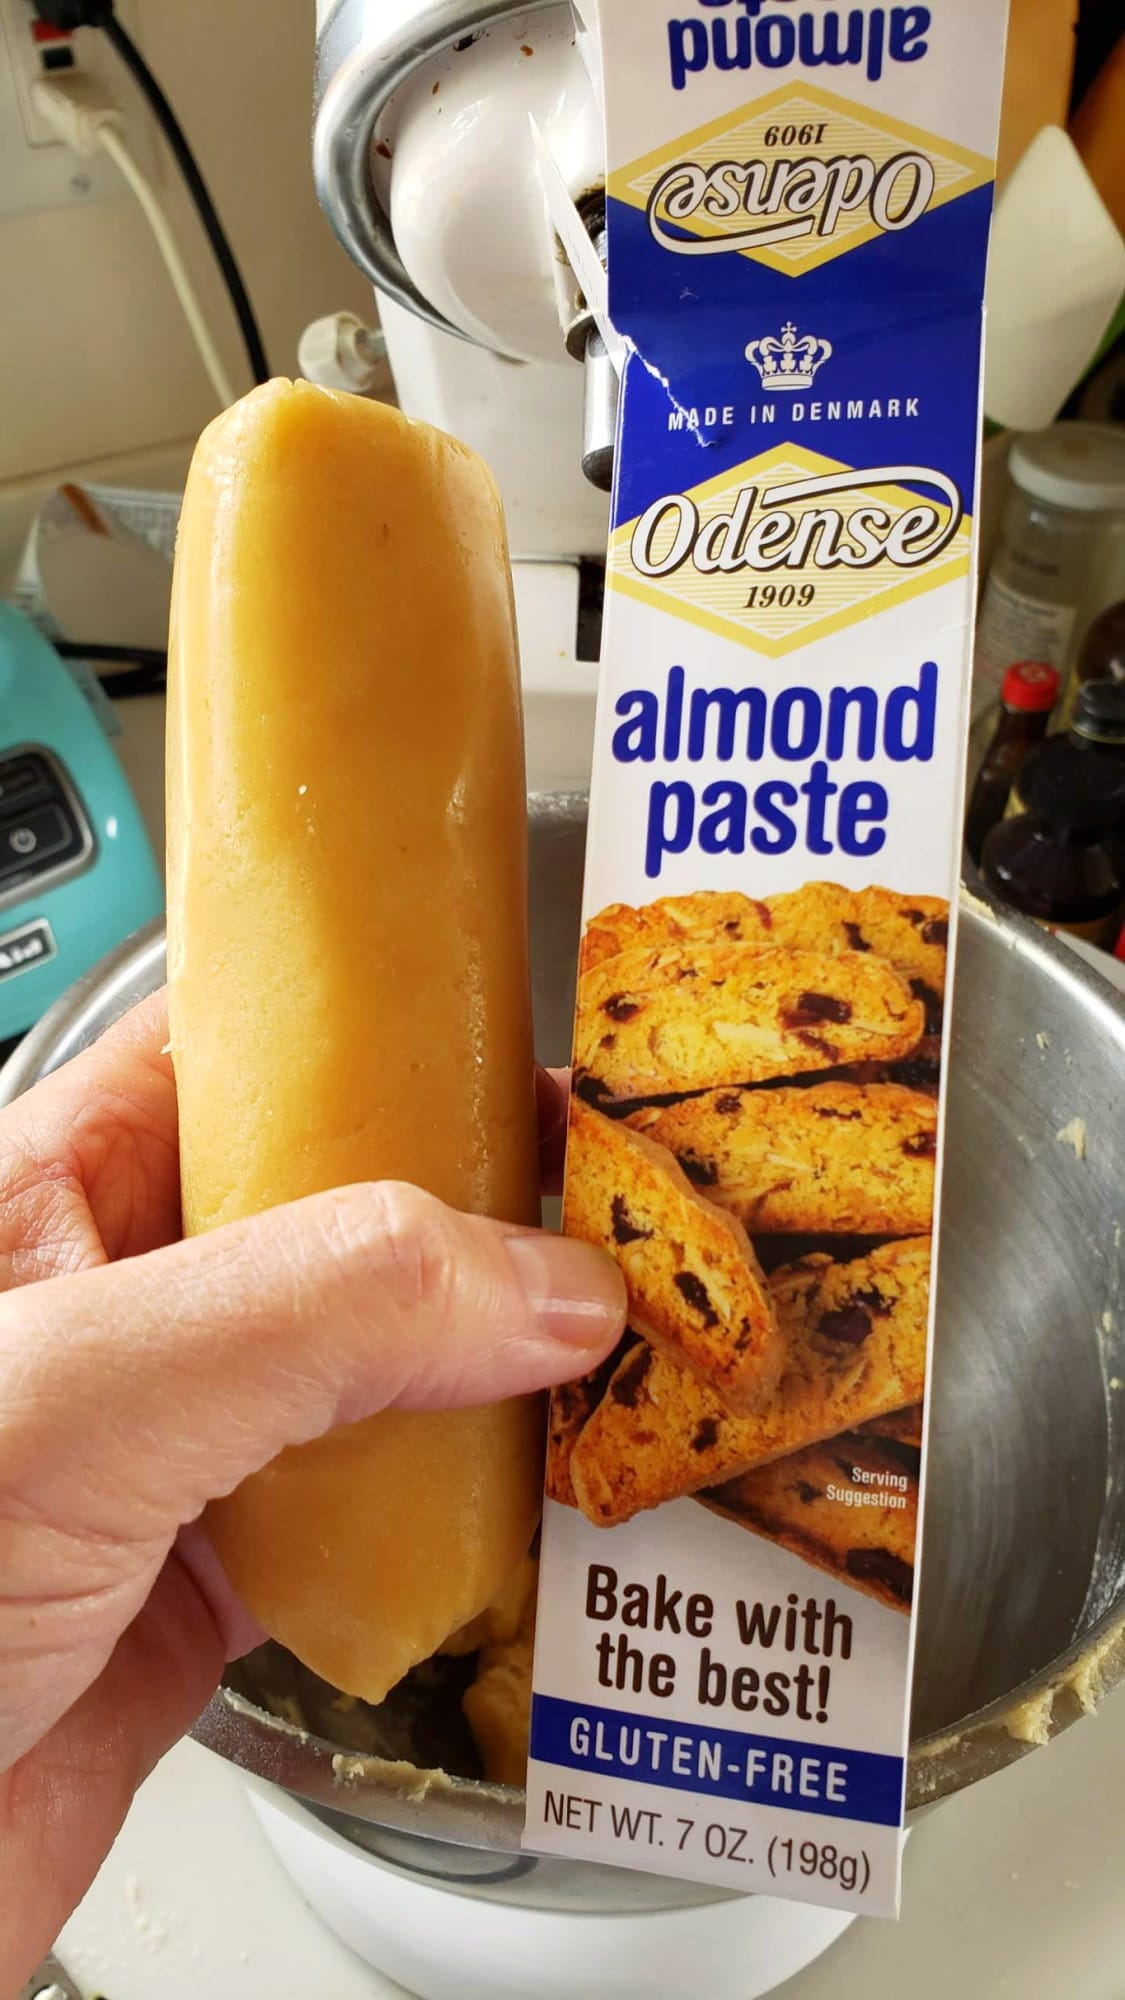 Hand holding a cylinder of Odense almond paste out of the wrapper next to the box